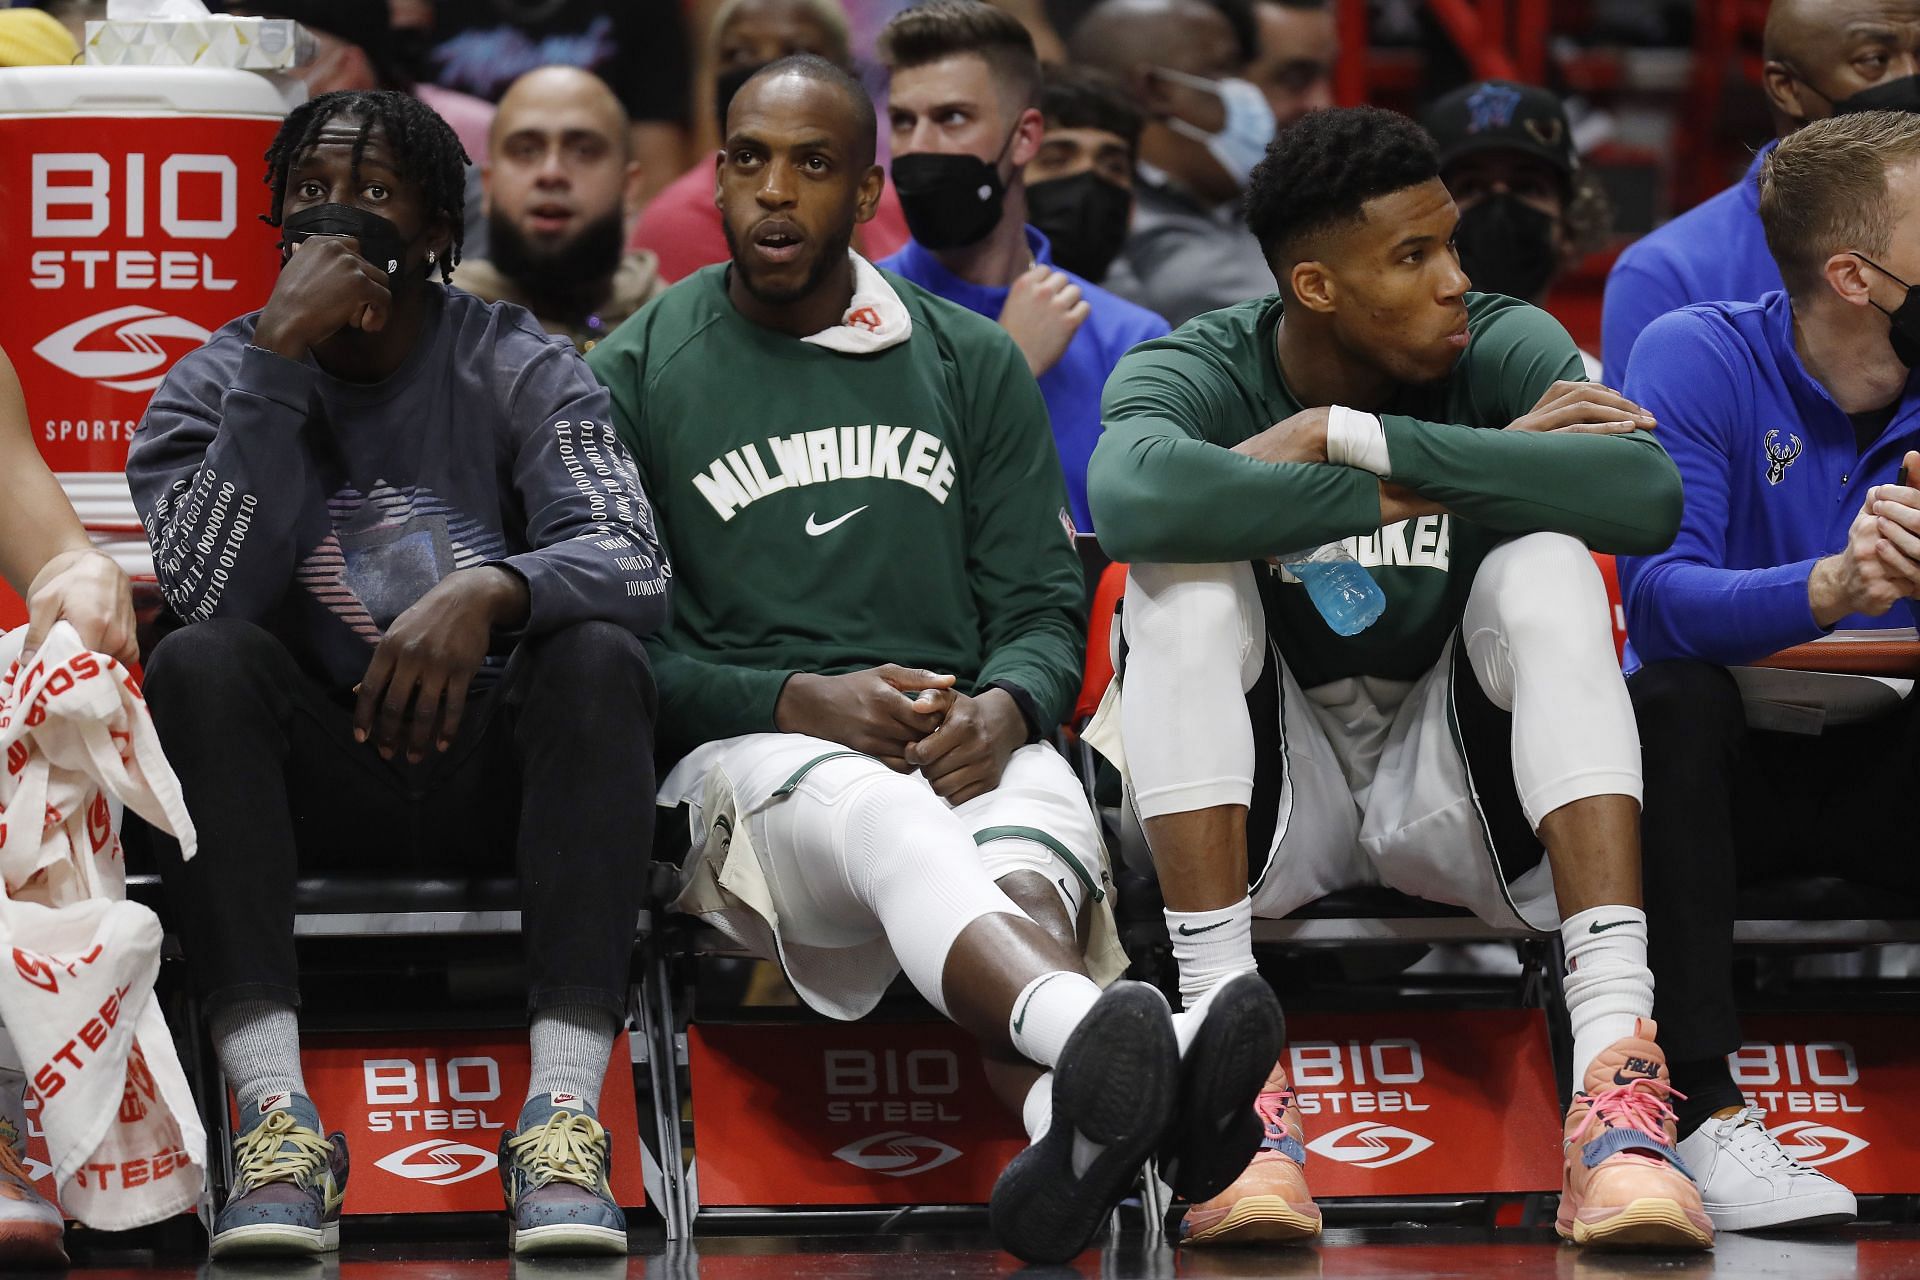 The Milwaukee Bucks are currently in the midst of an injury crisis